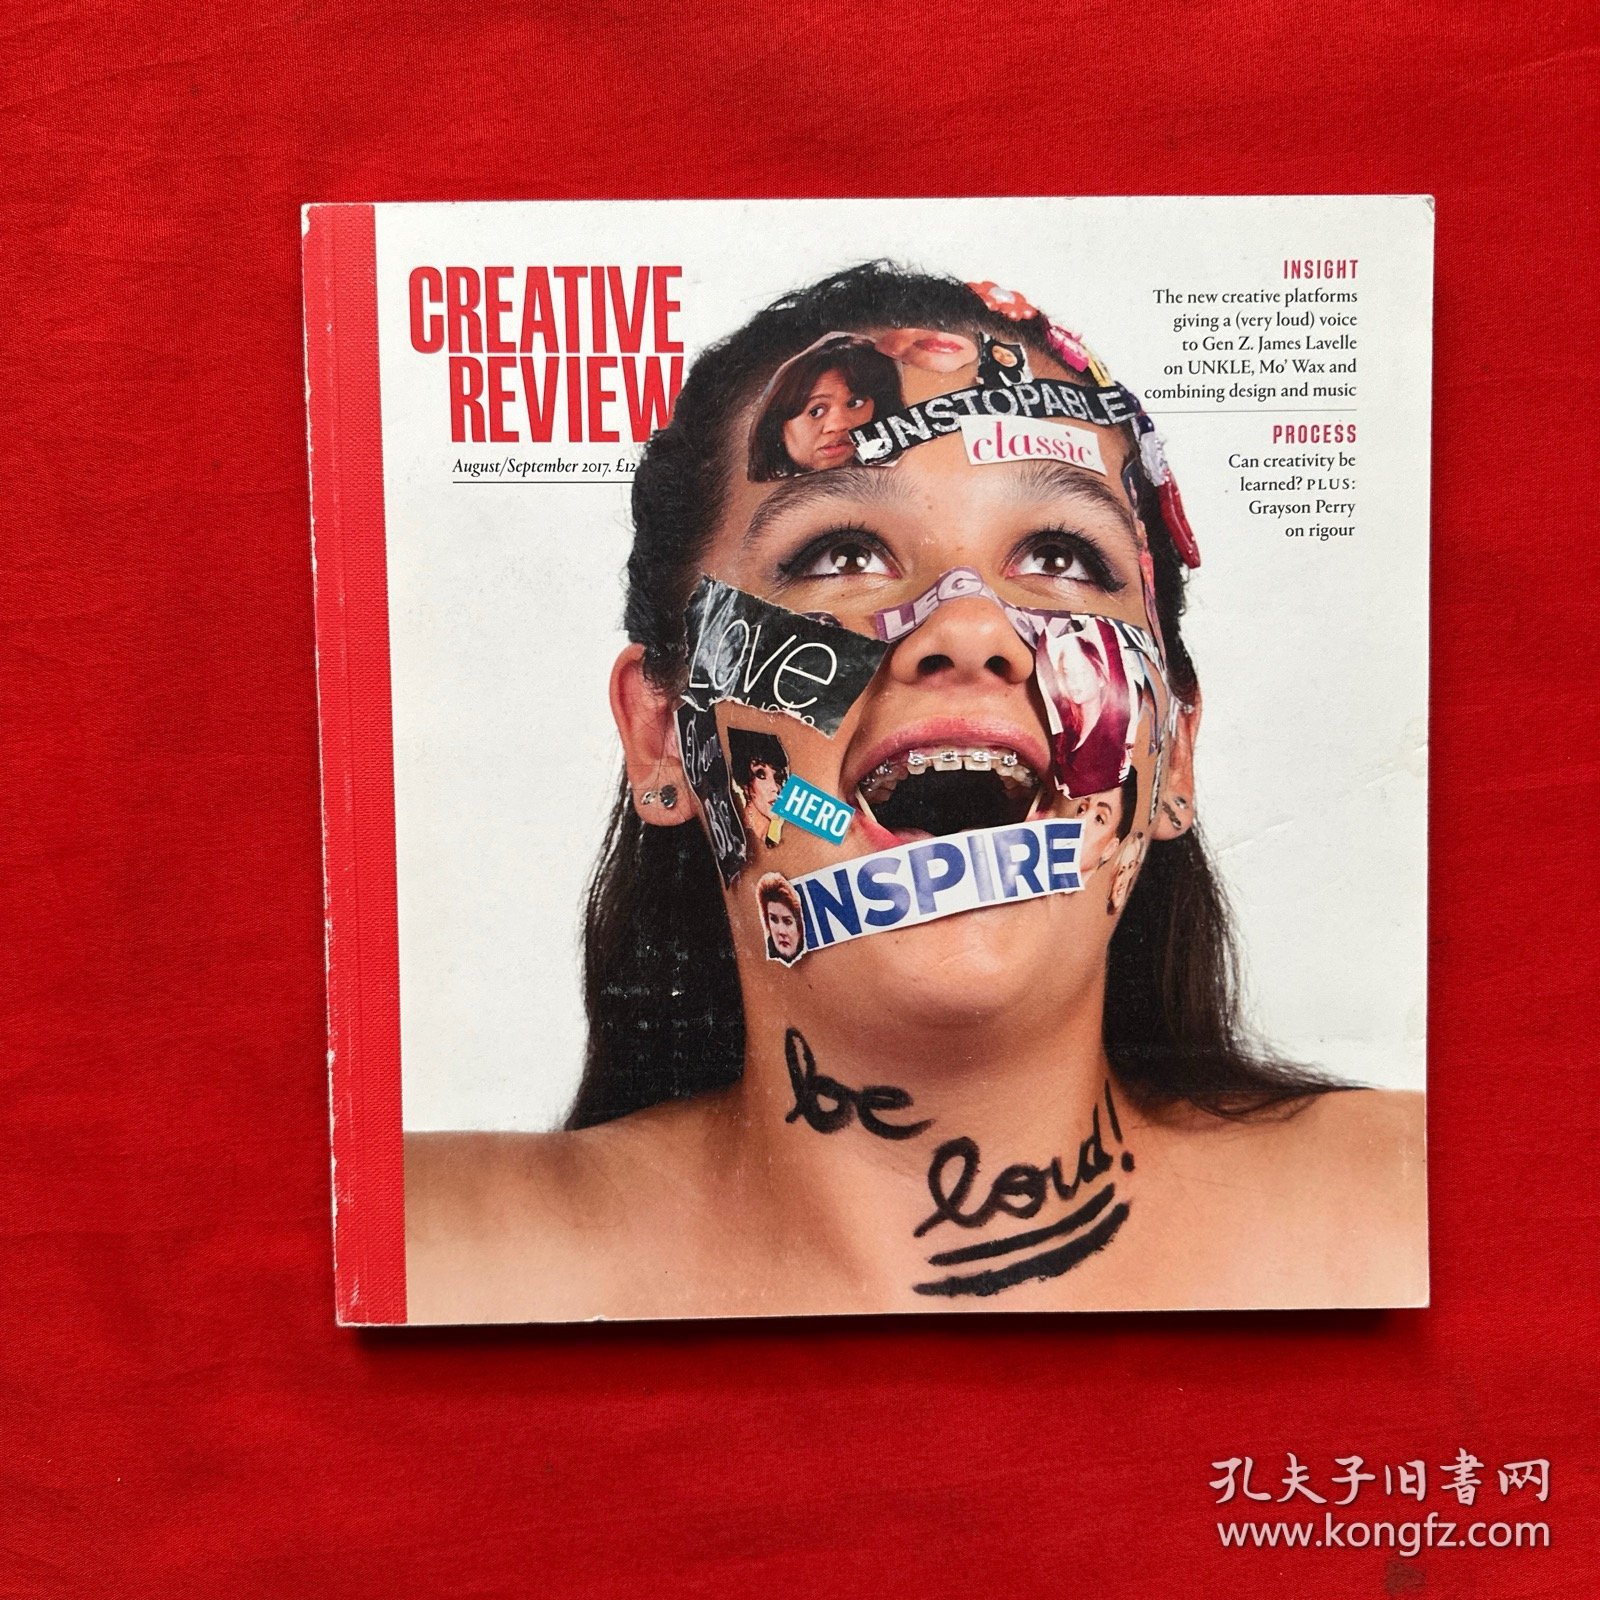 CREATIVE REVIEW